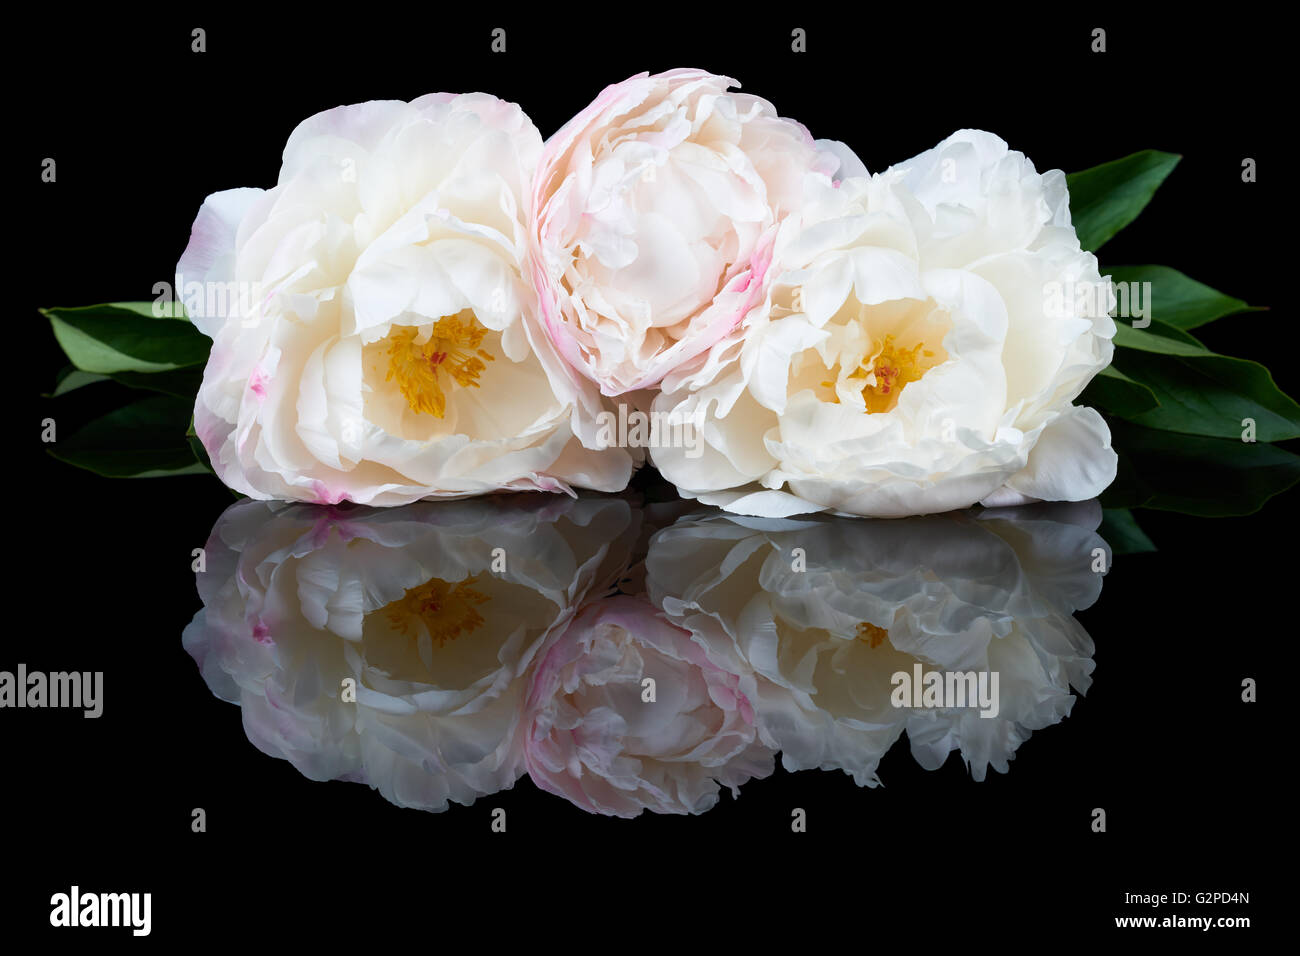 Bunch of three white and pink peonies isolated on black reflecting background Stock Photo